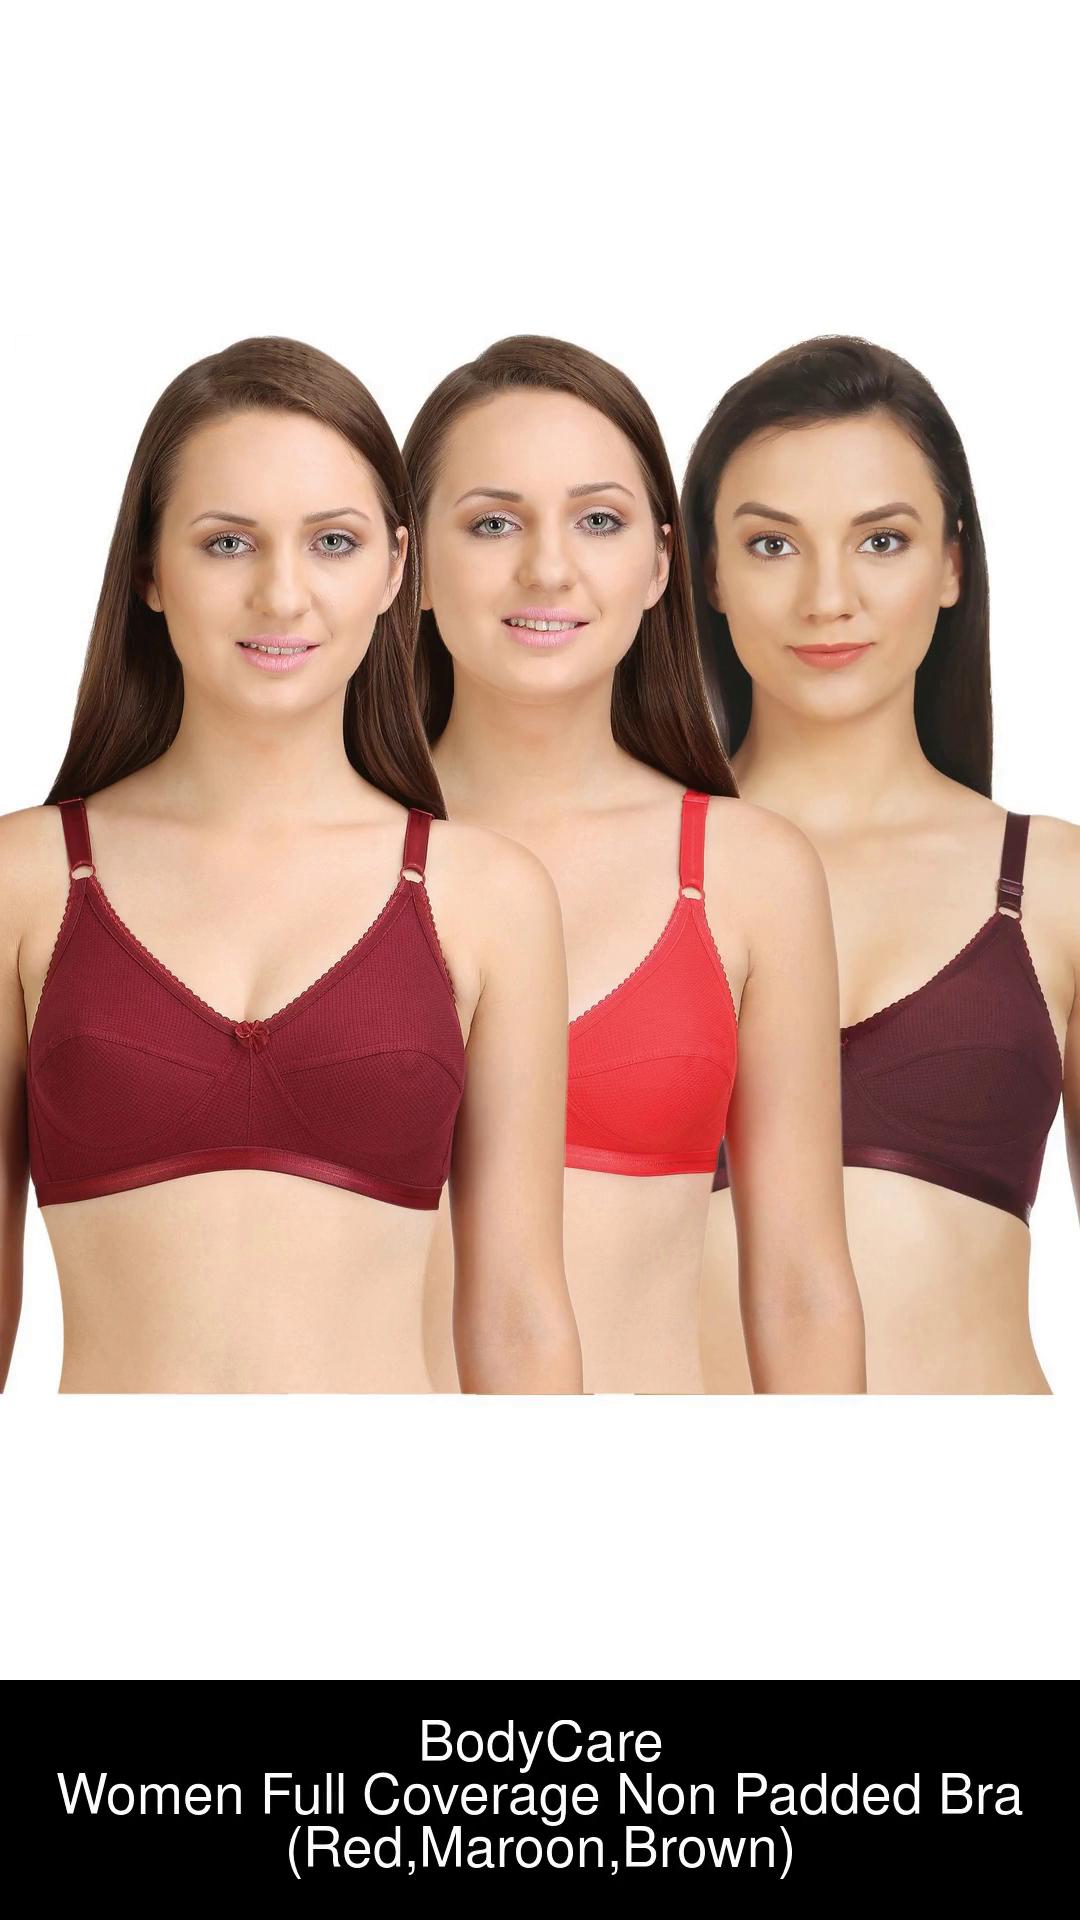 Bodycare Women's Perfect Coverage Polycotton Non Padded Everyday